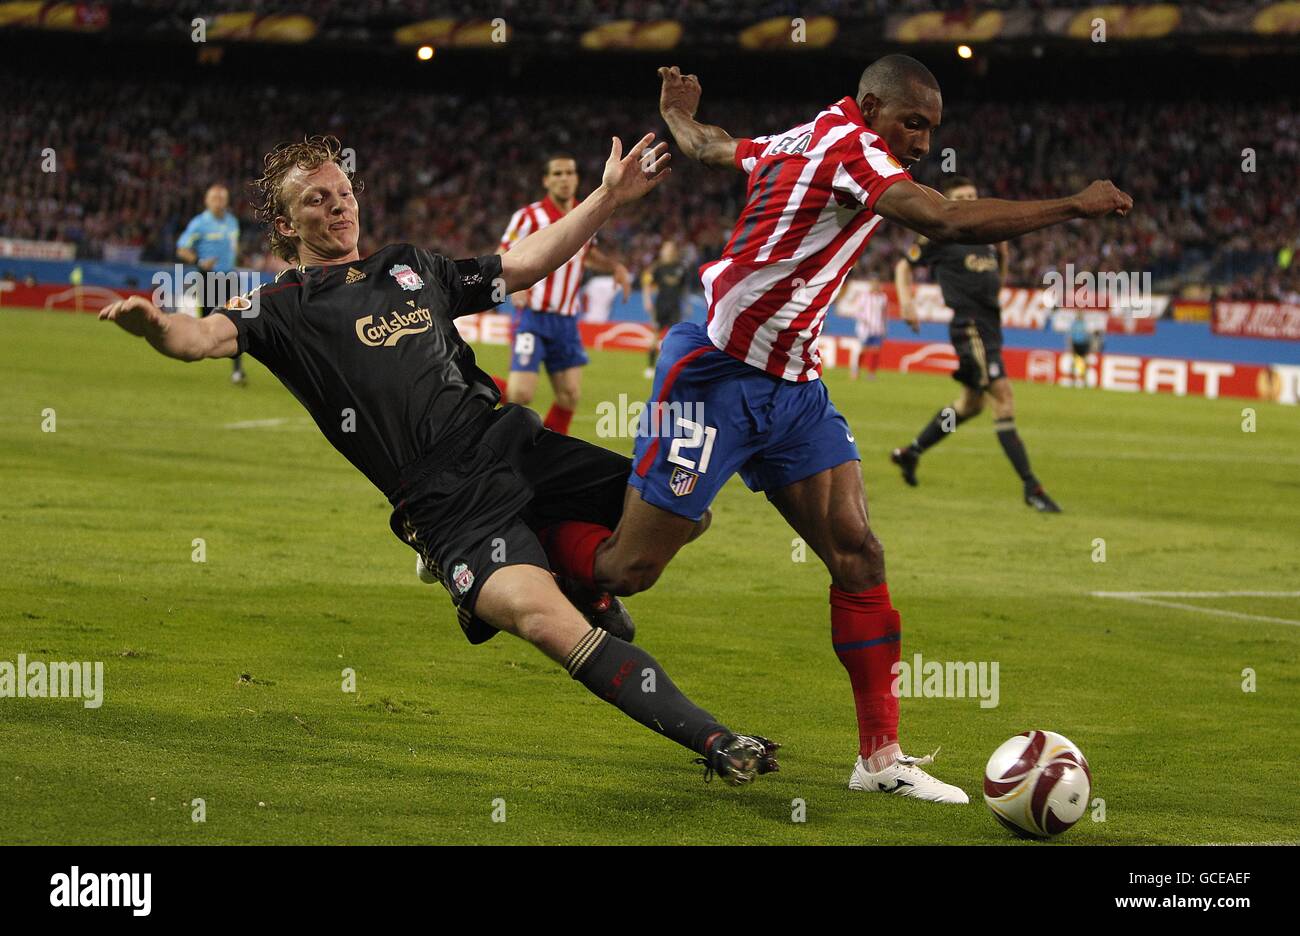 Liverpool's Dirk Kuyt (left) is challenged by Atletico Madrid's Luis Amaranto Perea (right) for the ball Stock Photo